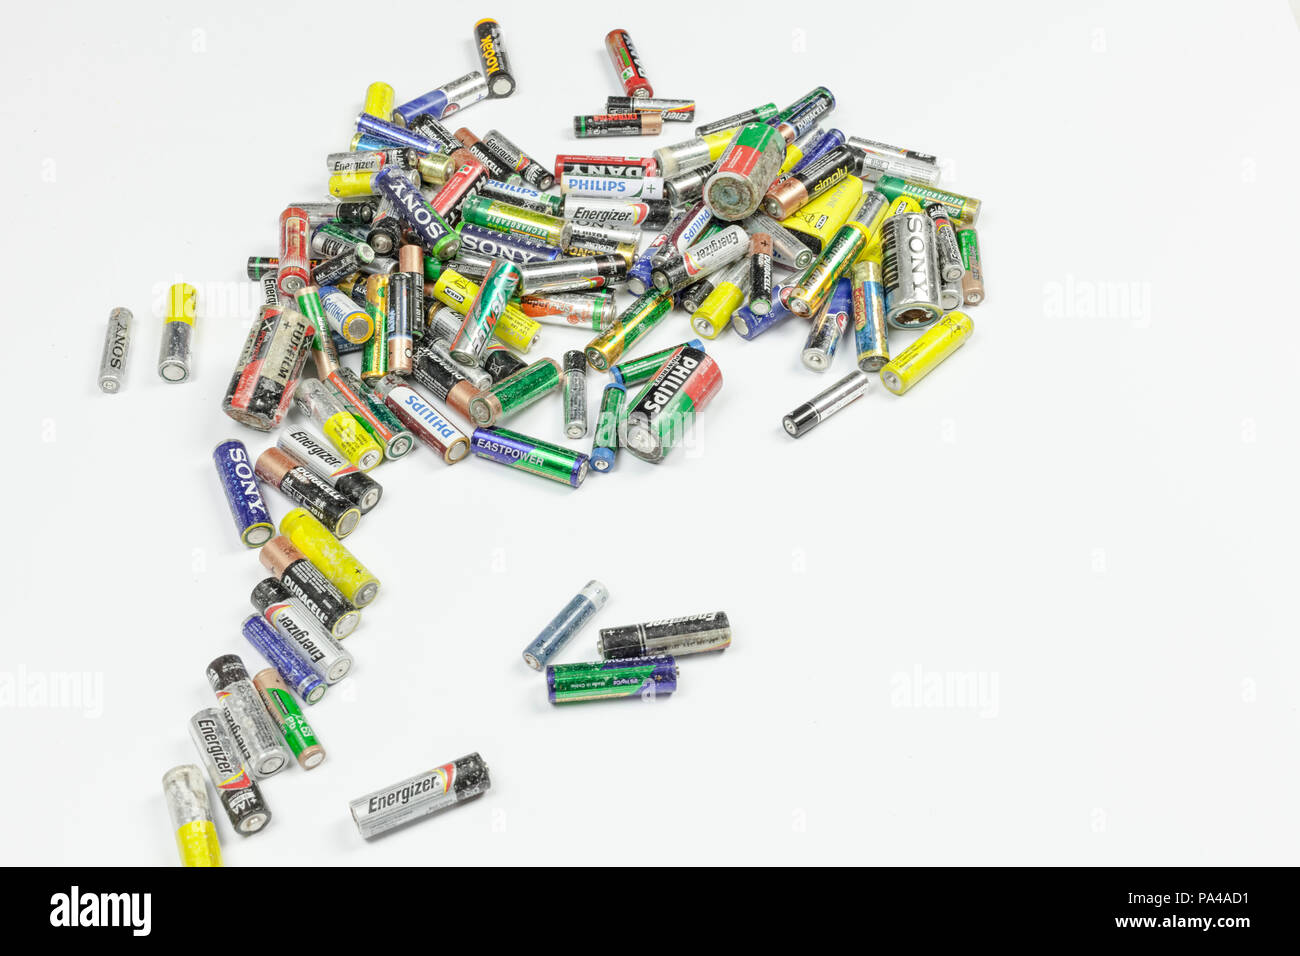 BARI, ITALY - JUNE 9, 2017 - Old used batteries on a white background. Studio shot, editorial use. Stock Photo